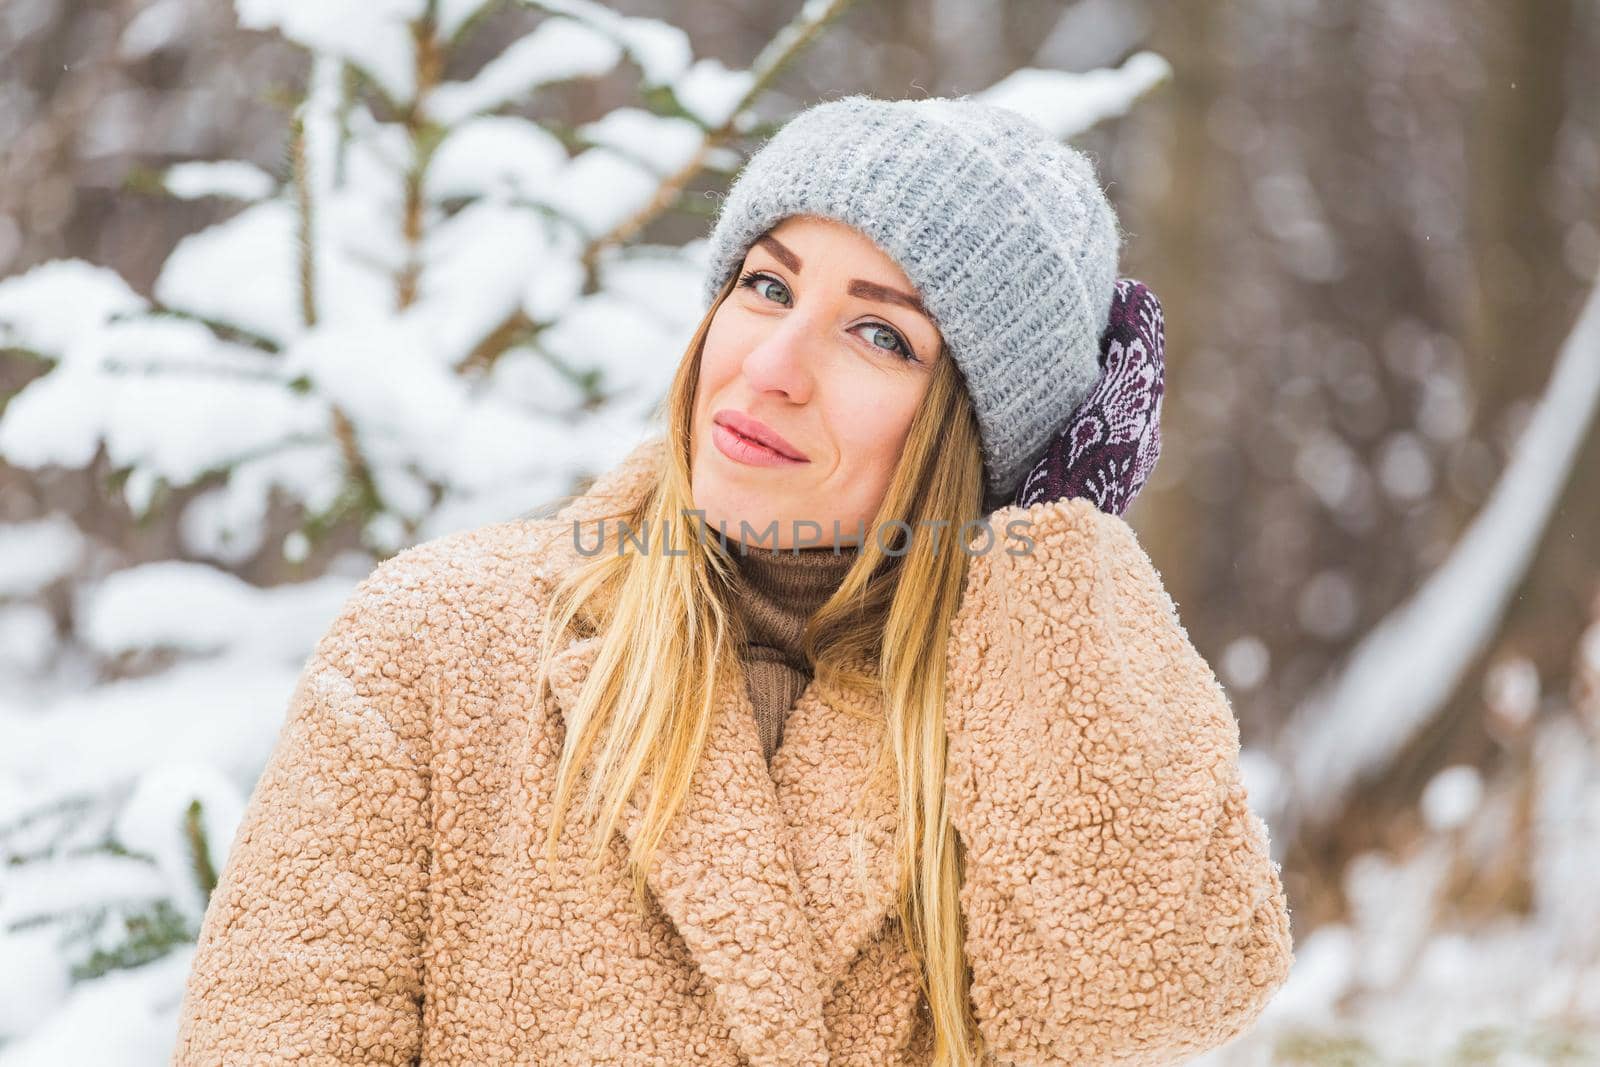 Attractive young woman in winter time outdoor. Snow, holidays and season concept. by Satura86